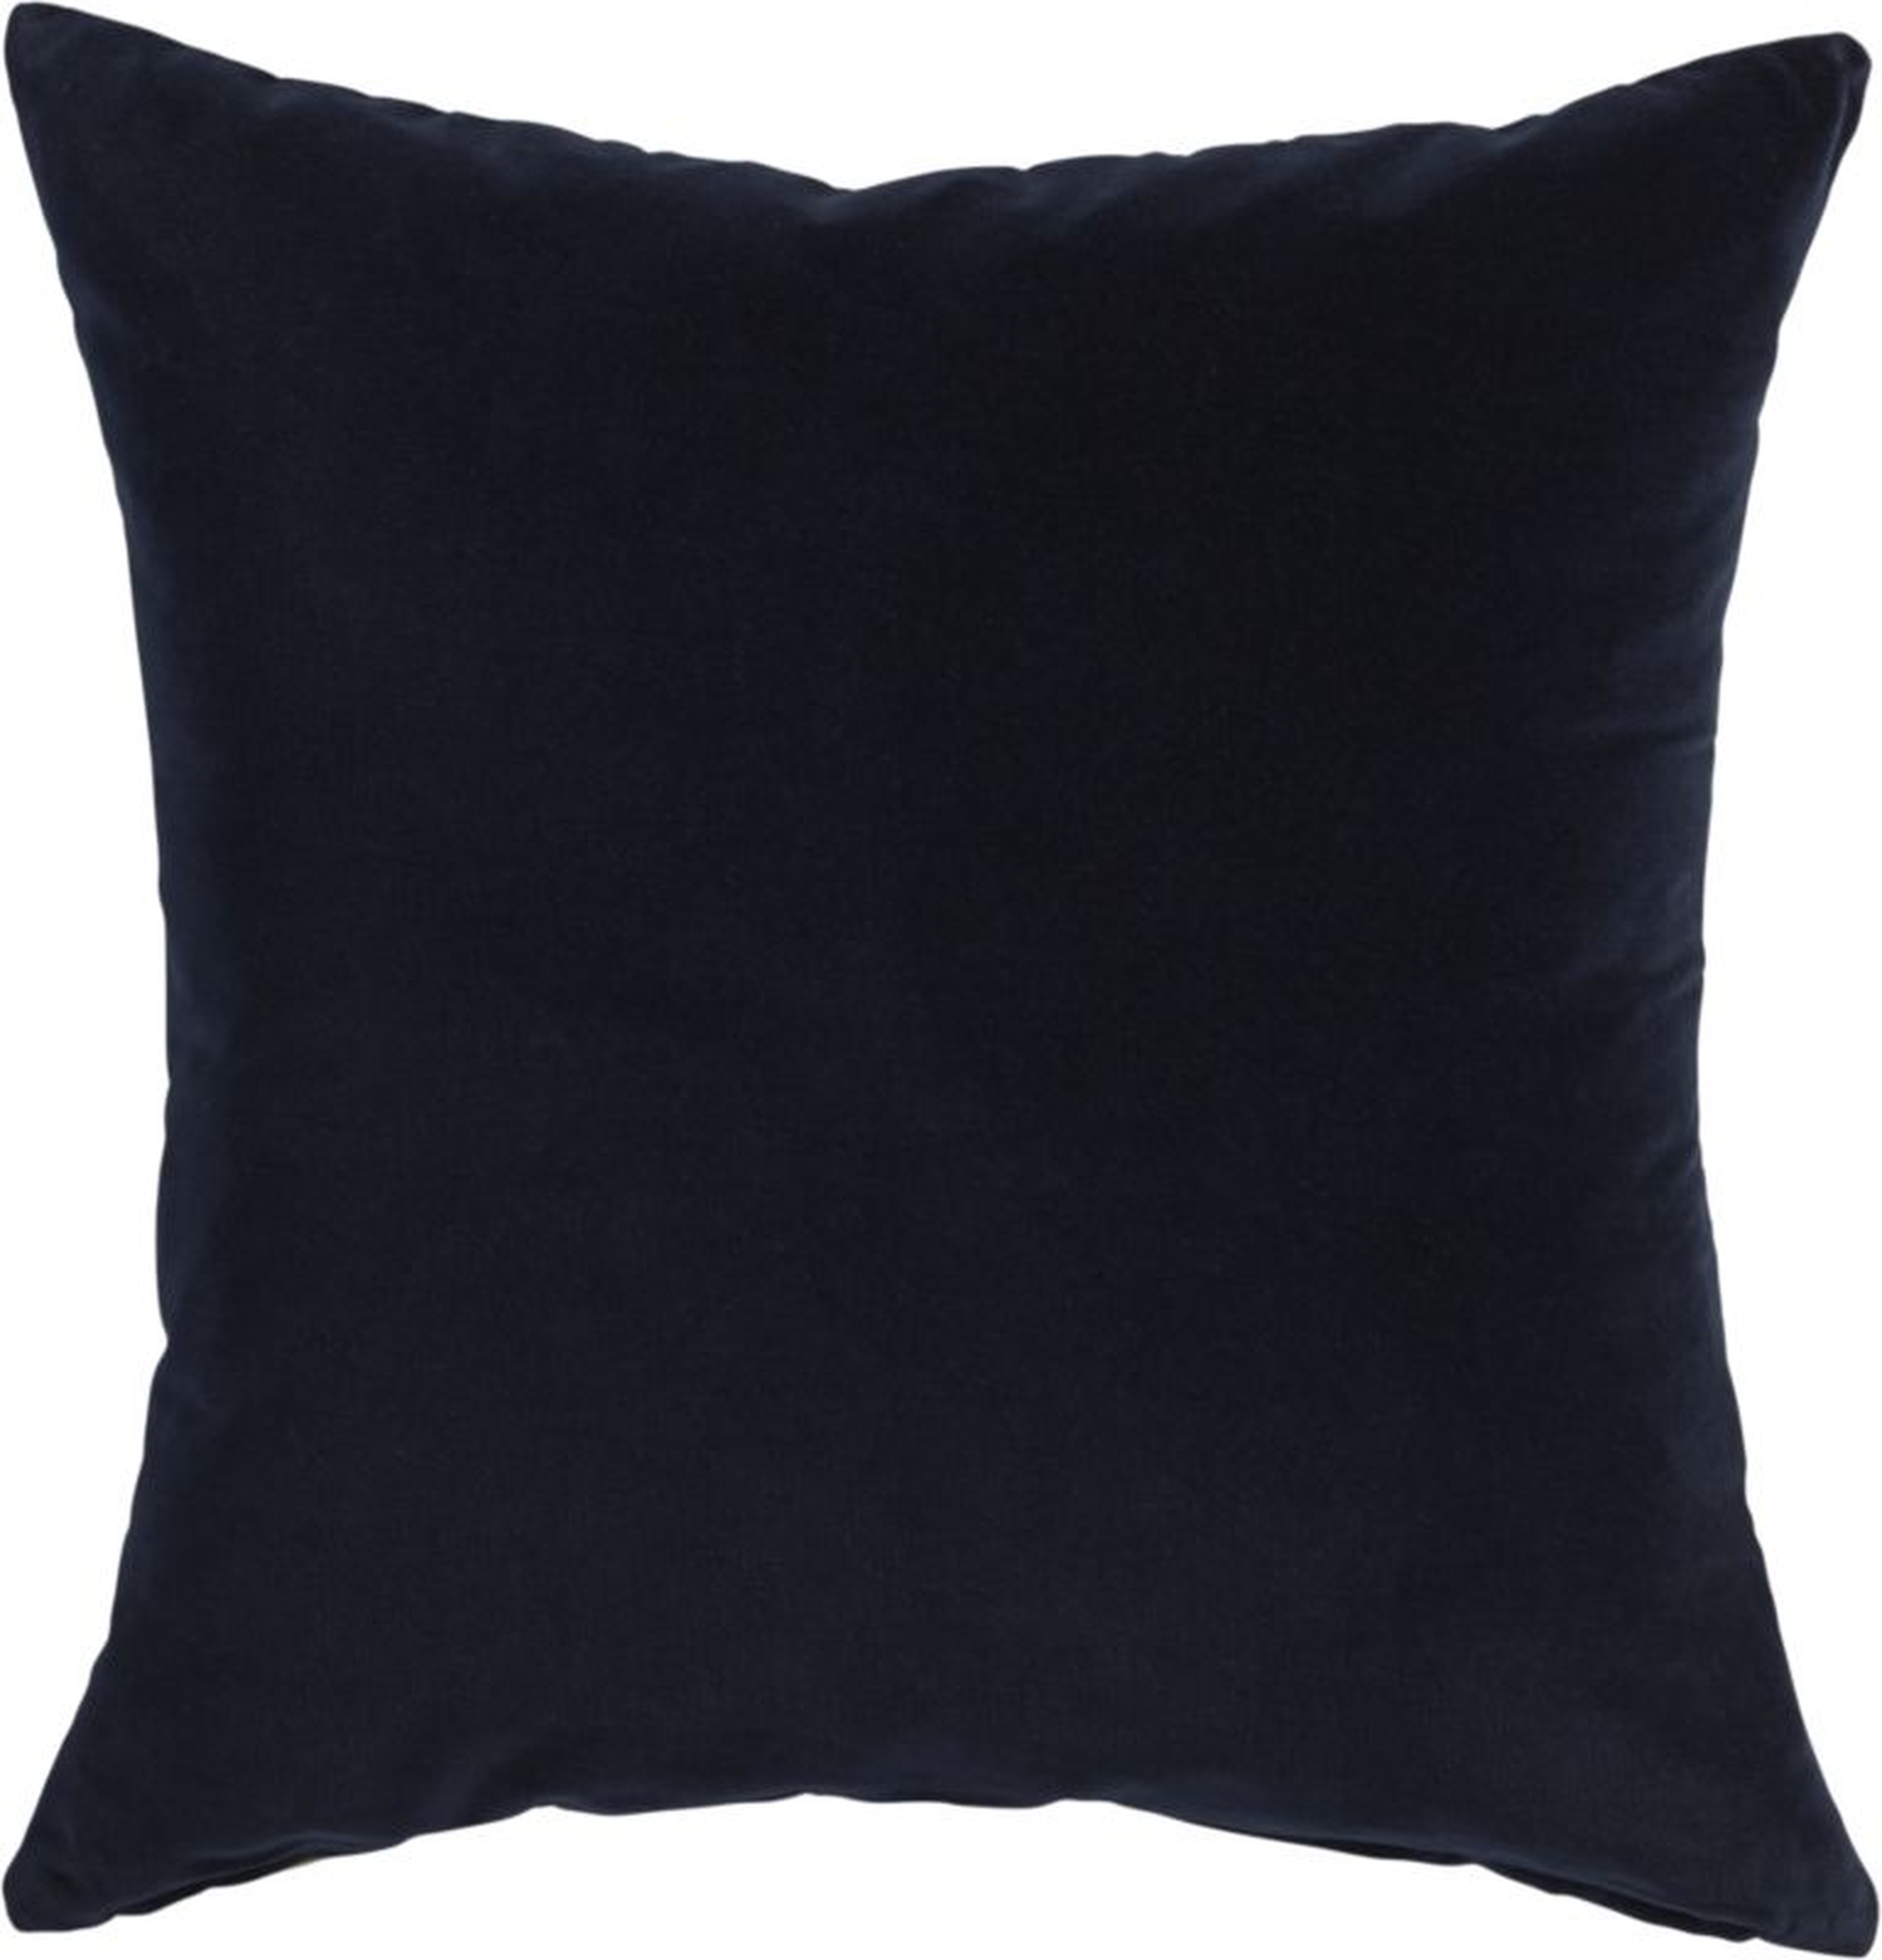 leisure pillow with down-alternative insert - CB2